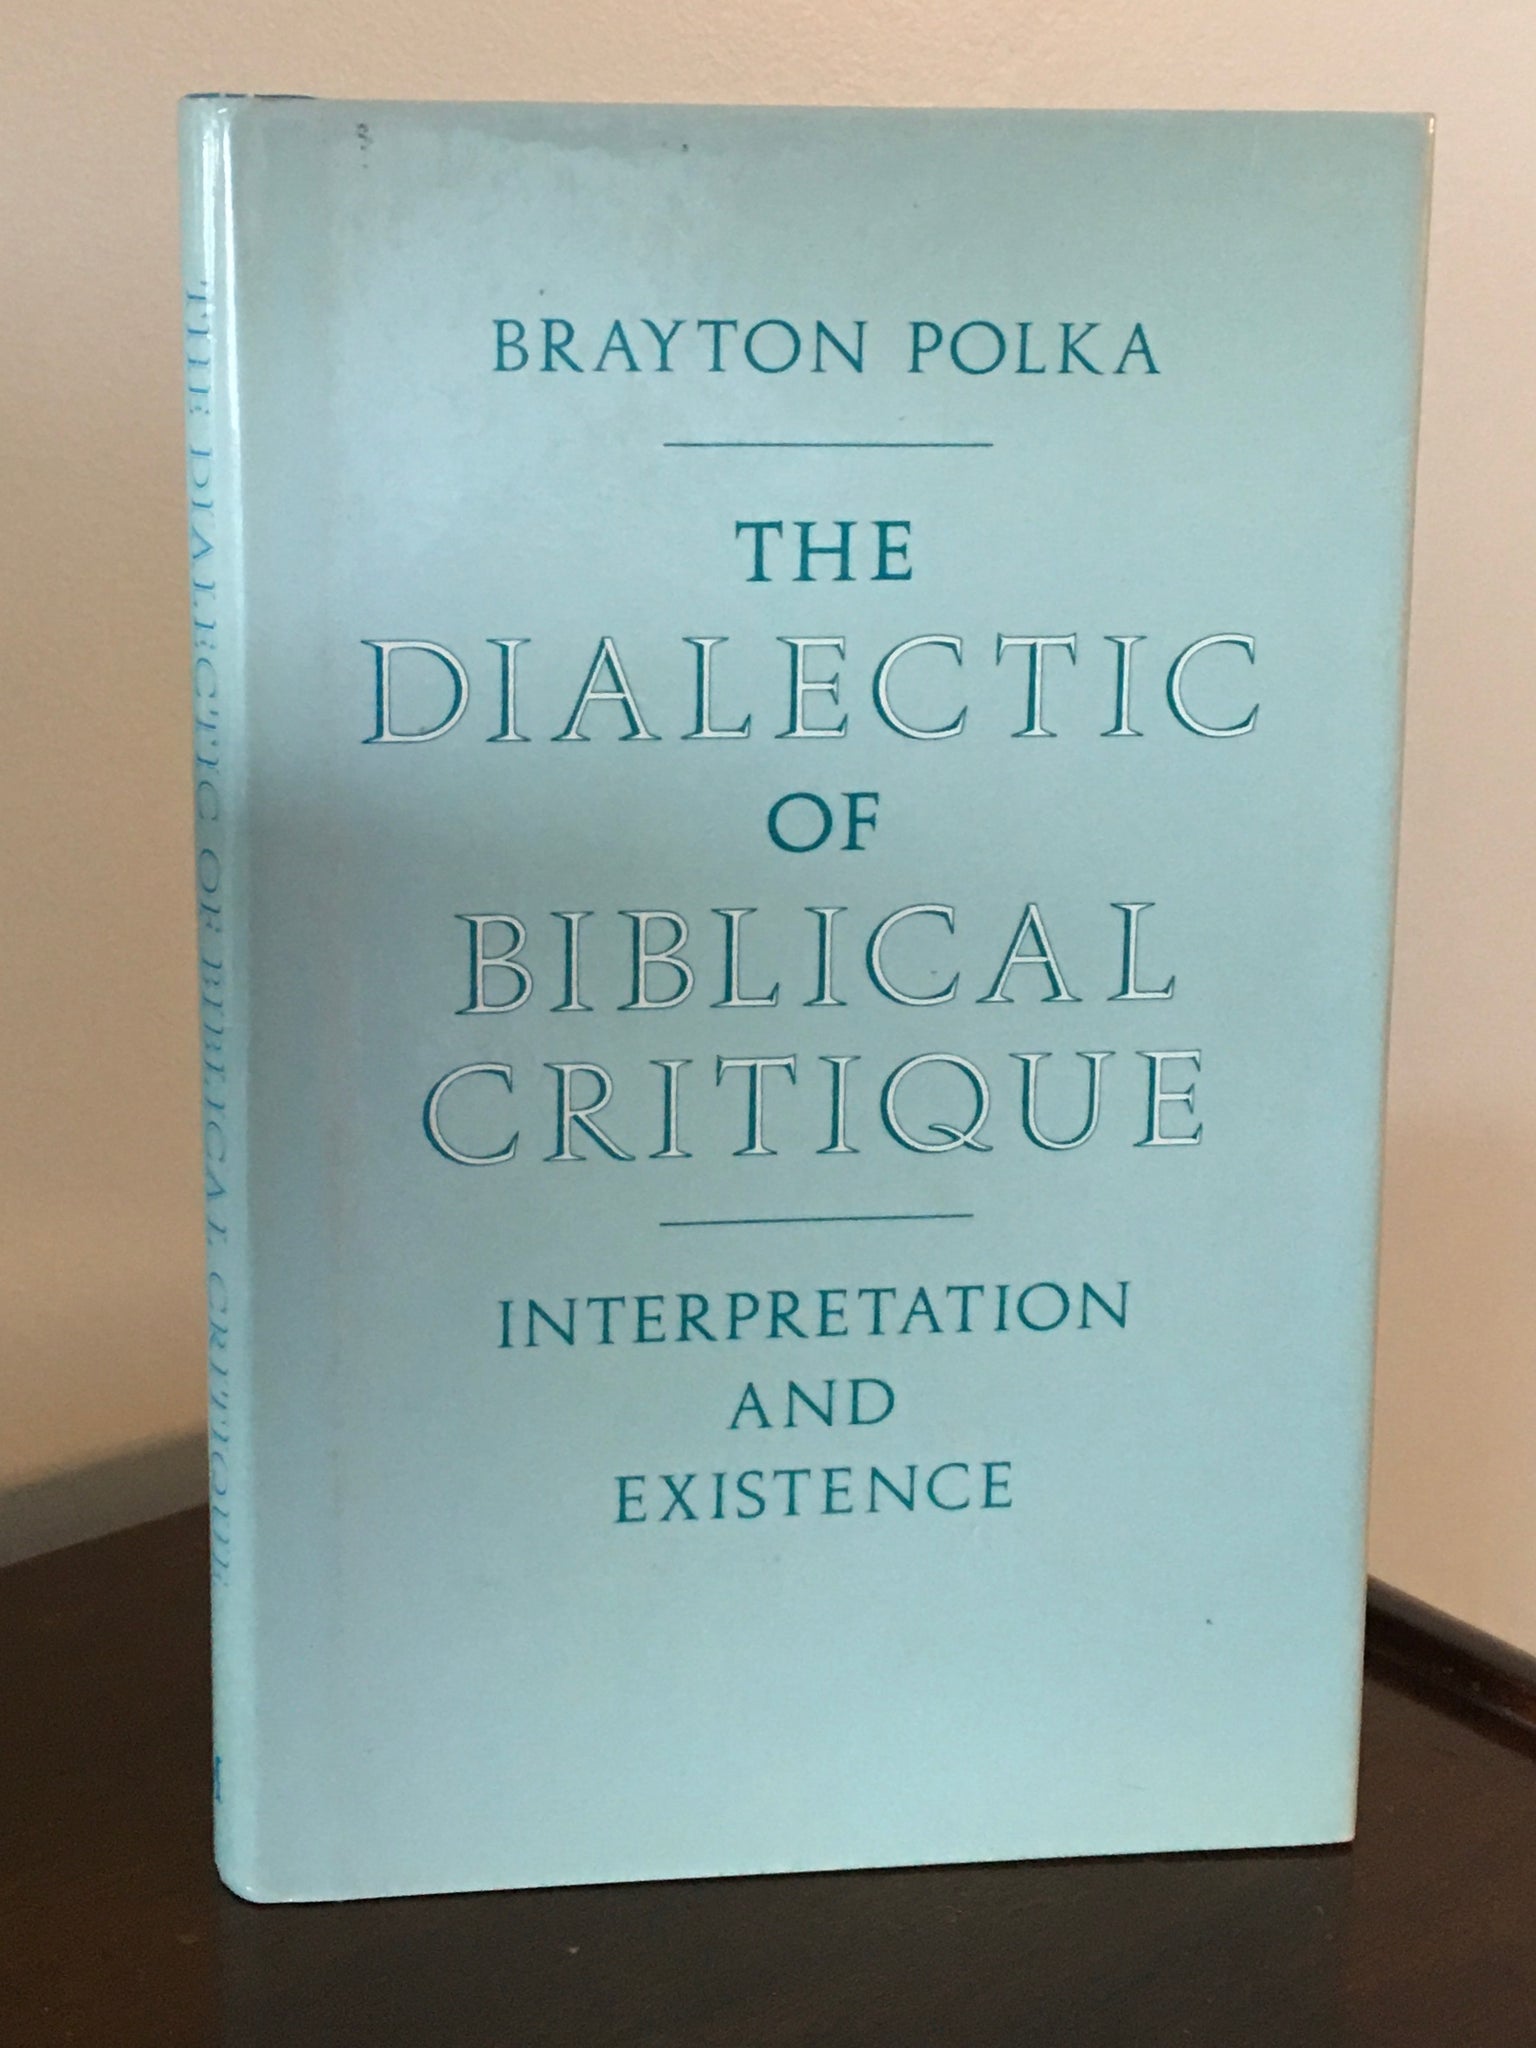 The Dialectic of Biblical Critique    Interpretation and Existence